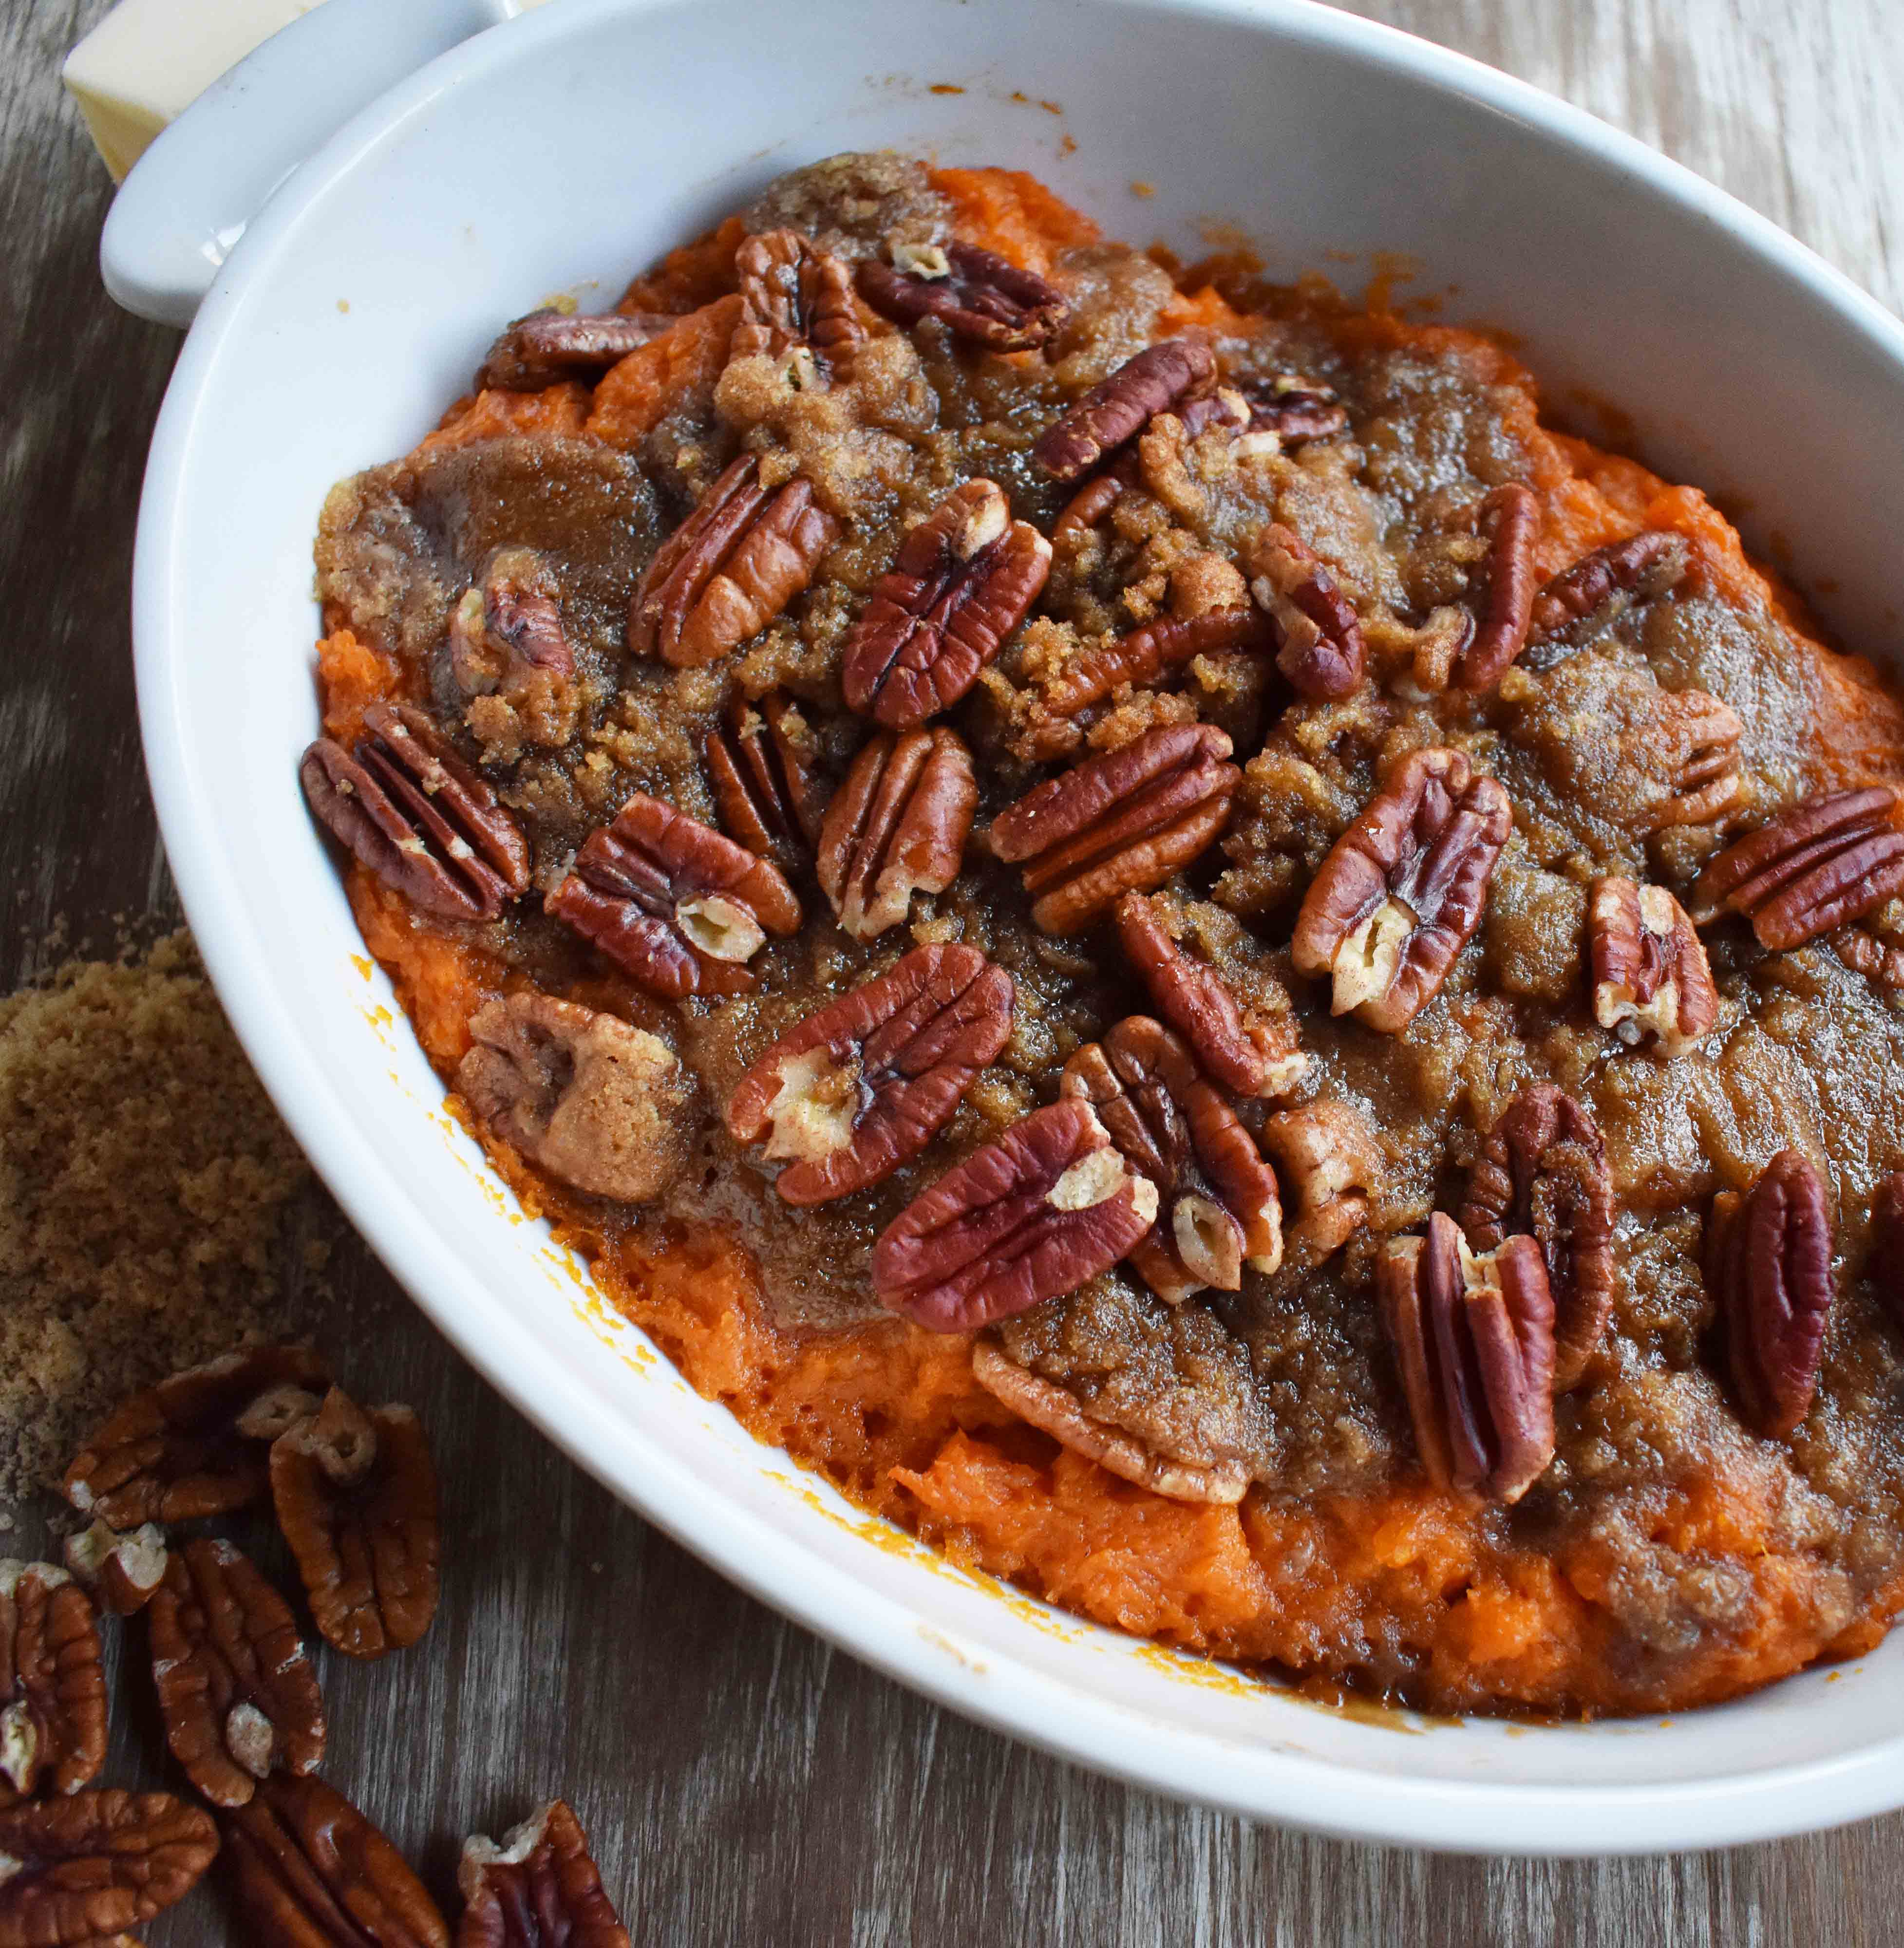 Candied Yams With Pecans